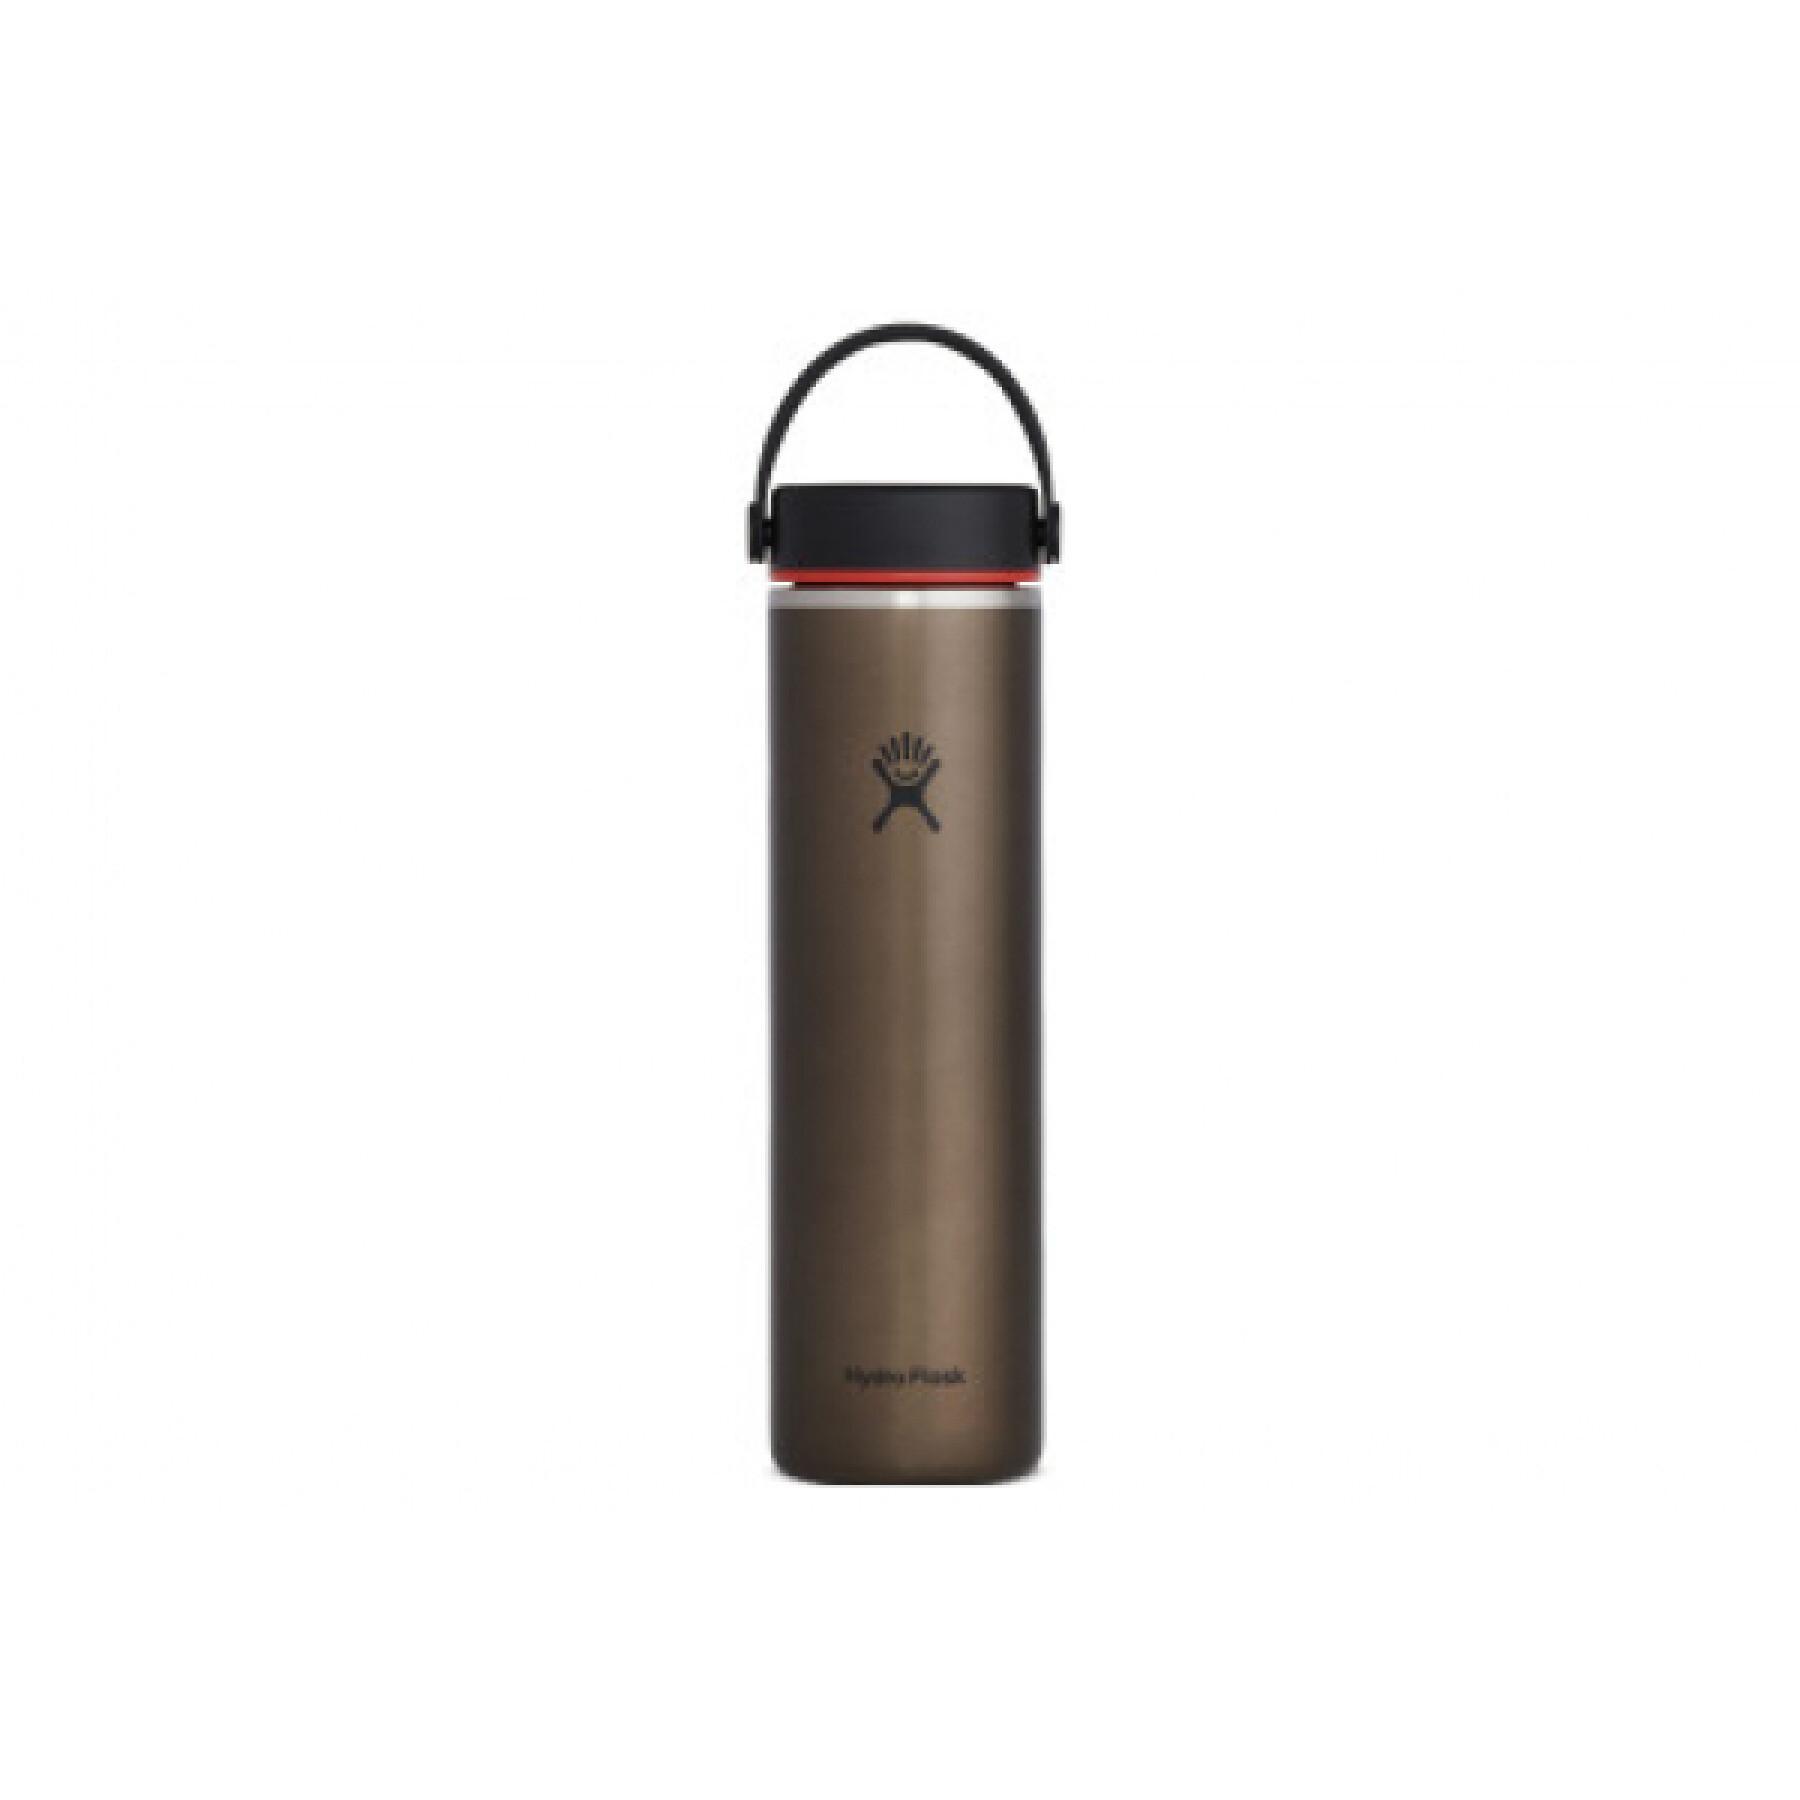 Standaard thermosfles Hydro Flask with mouth standard lex cap 24 oz